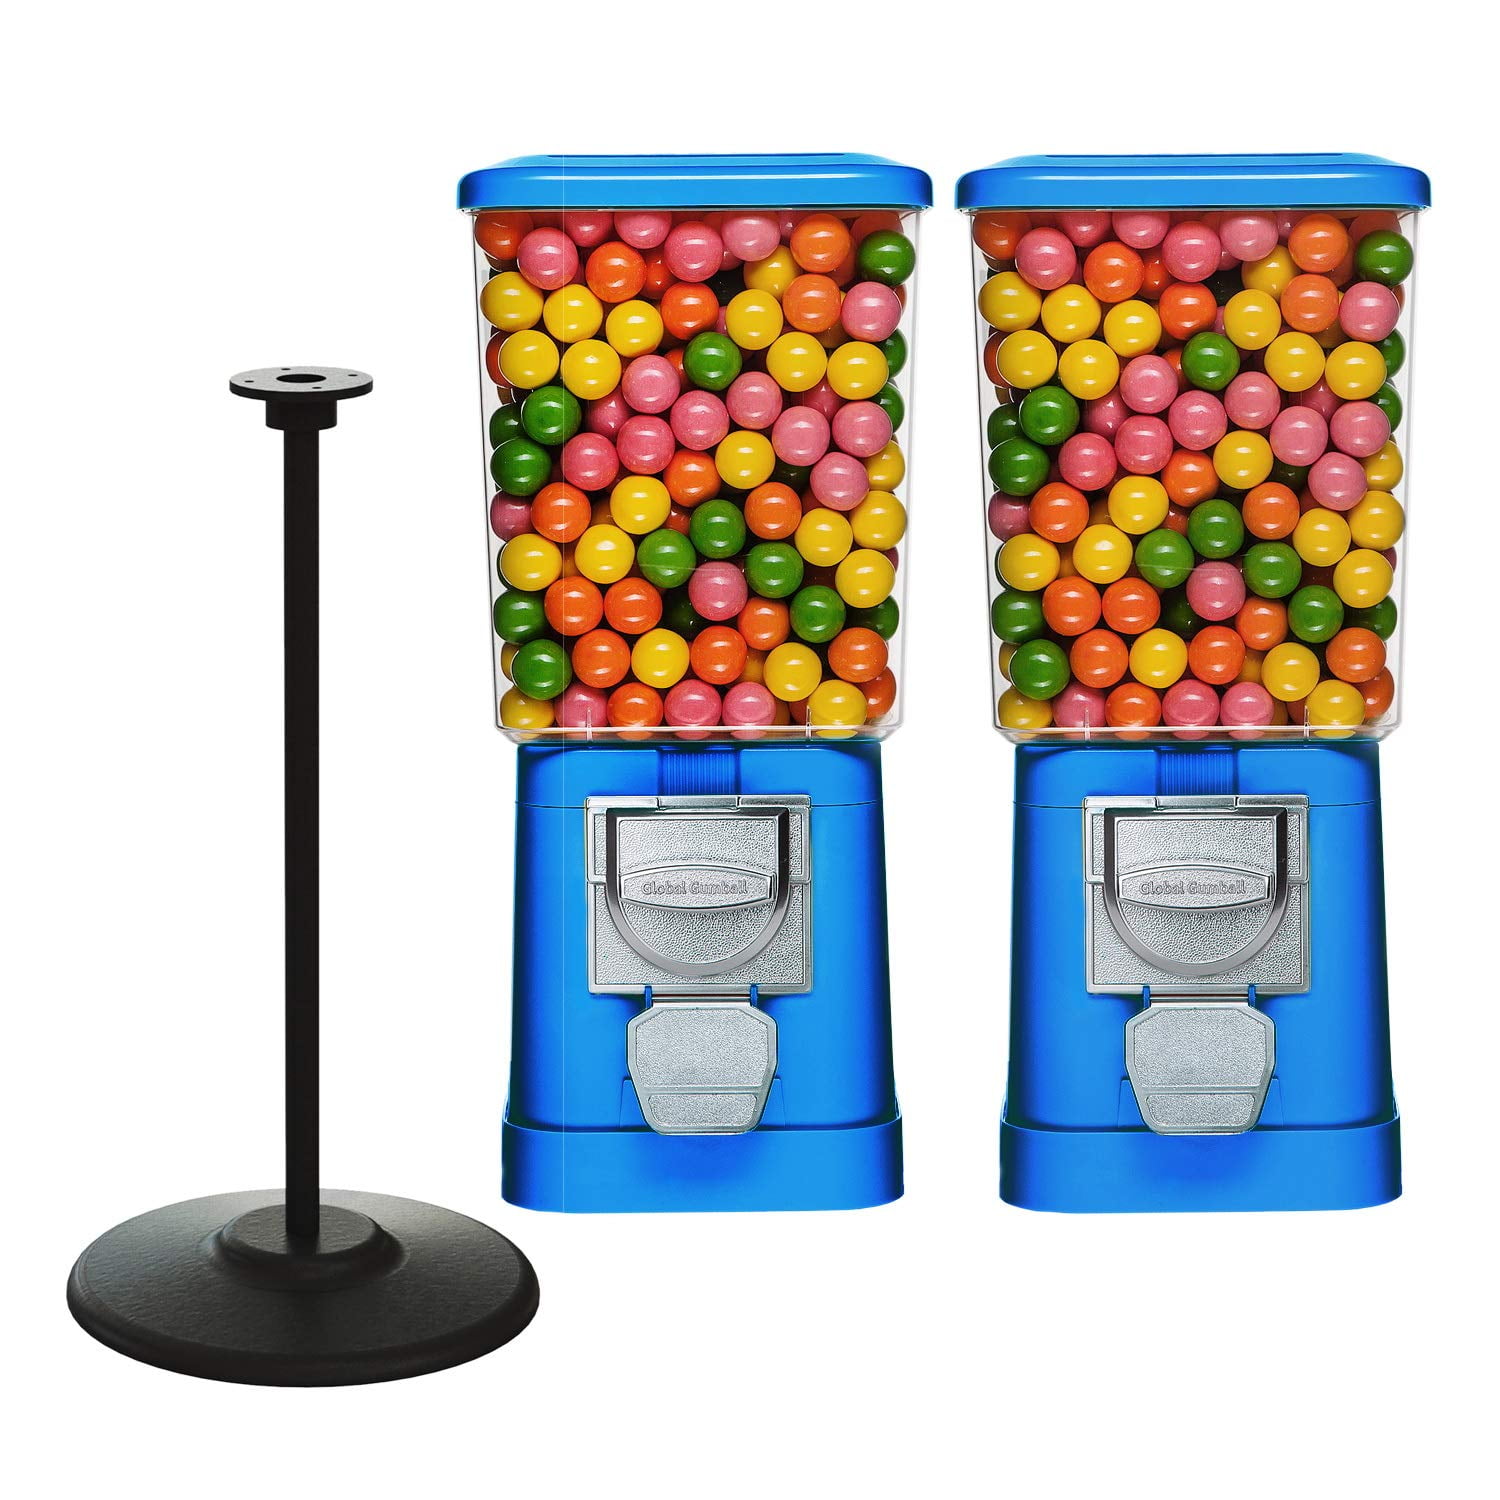 New Bubble Gum Gumball Dispenser Toy Machine 90g Bag Included Coin Operated Bank 